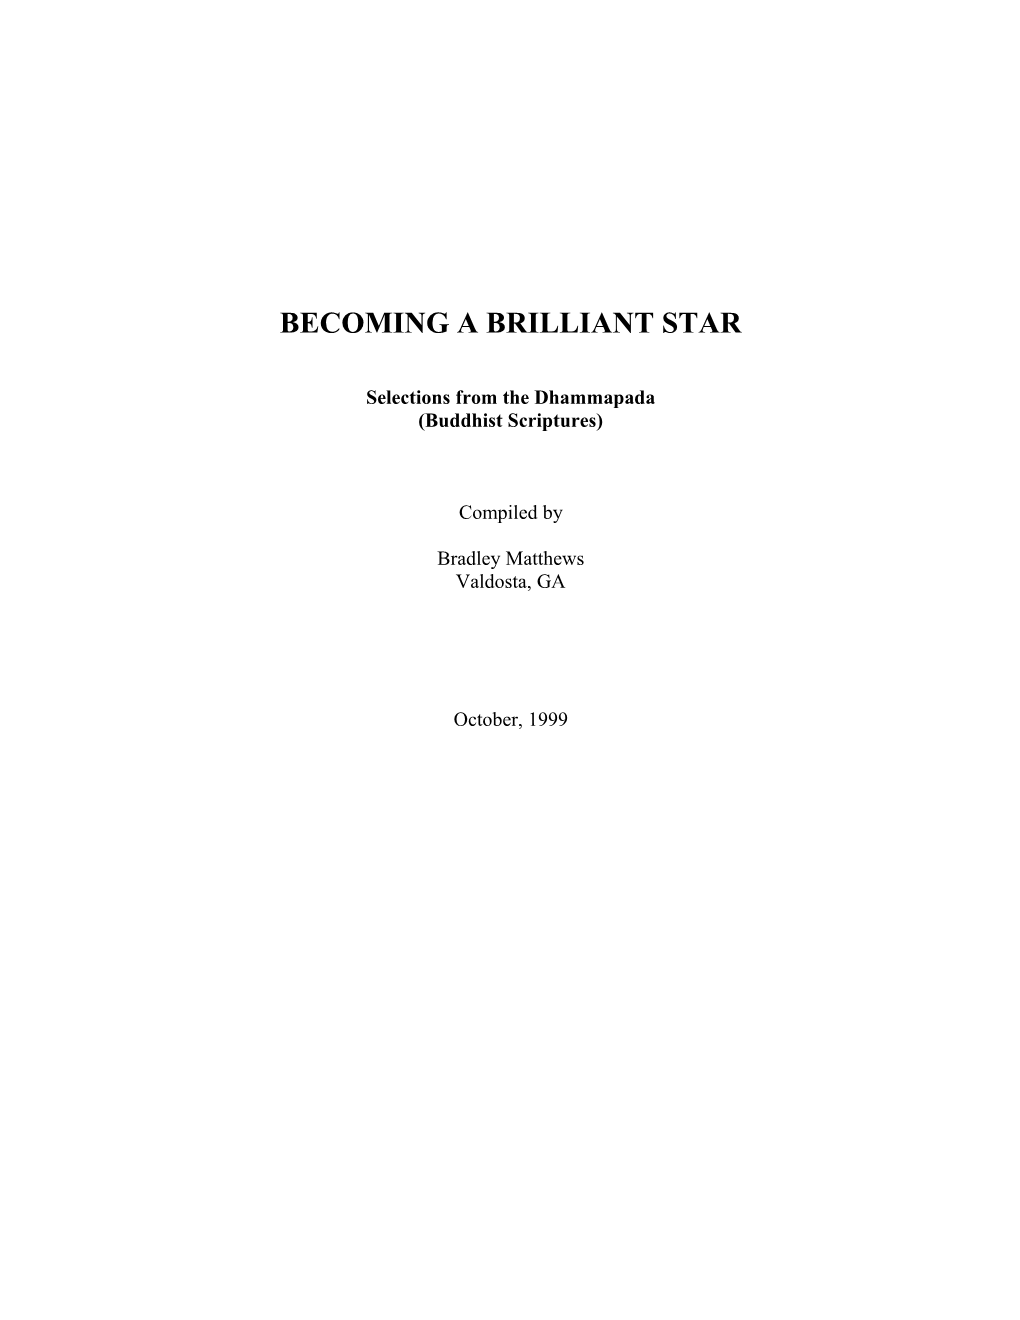 Becoming a Brilliant Star